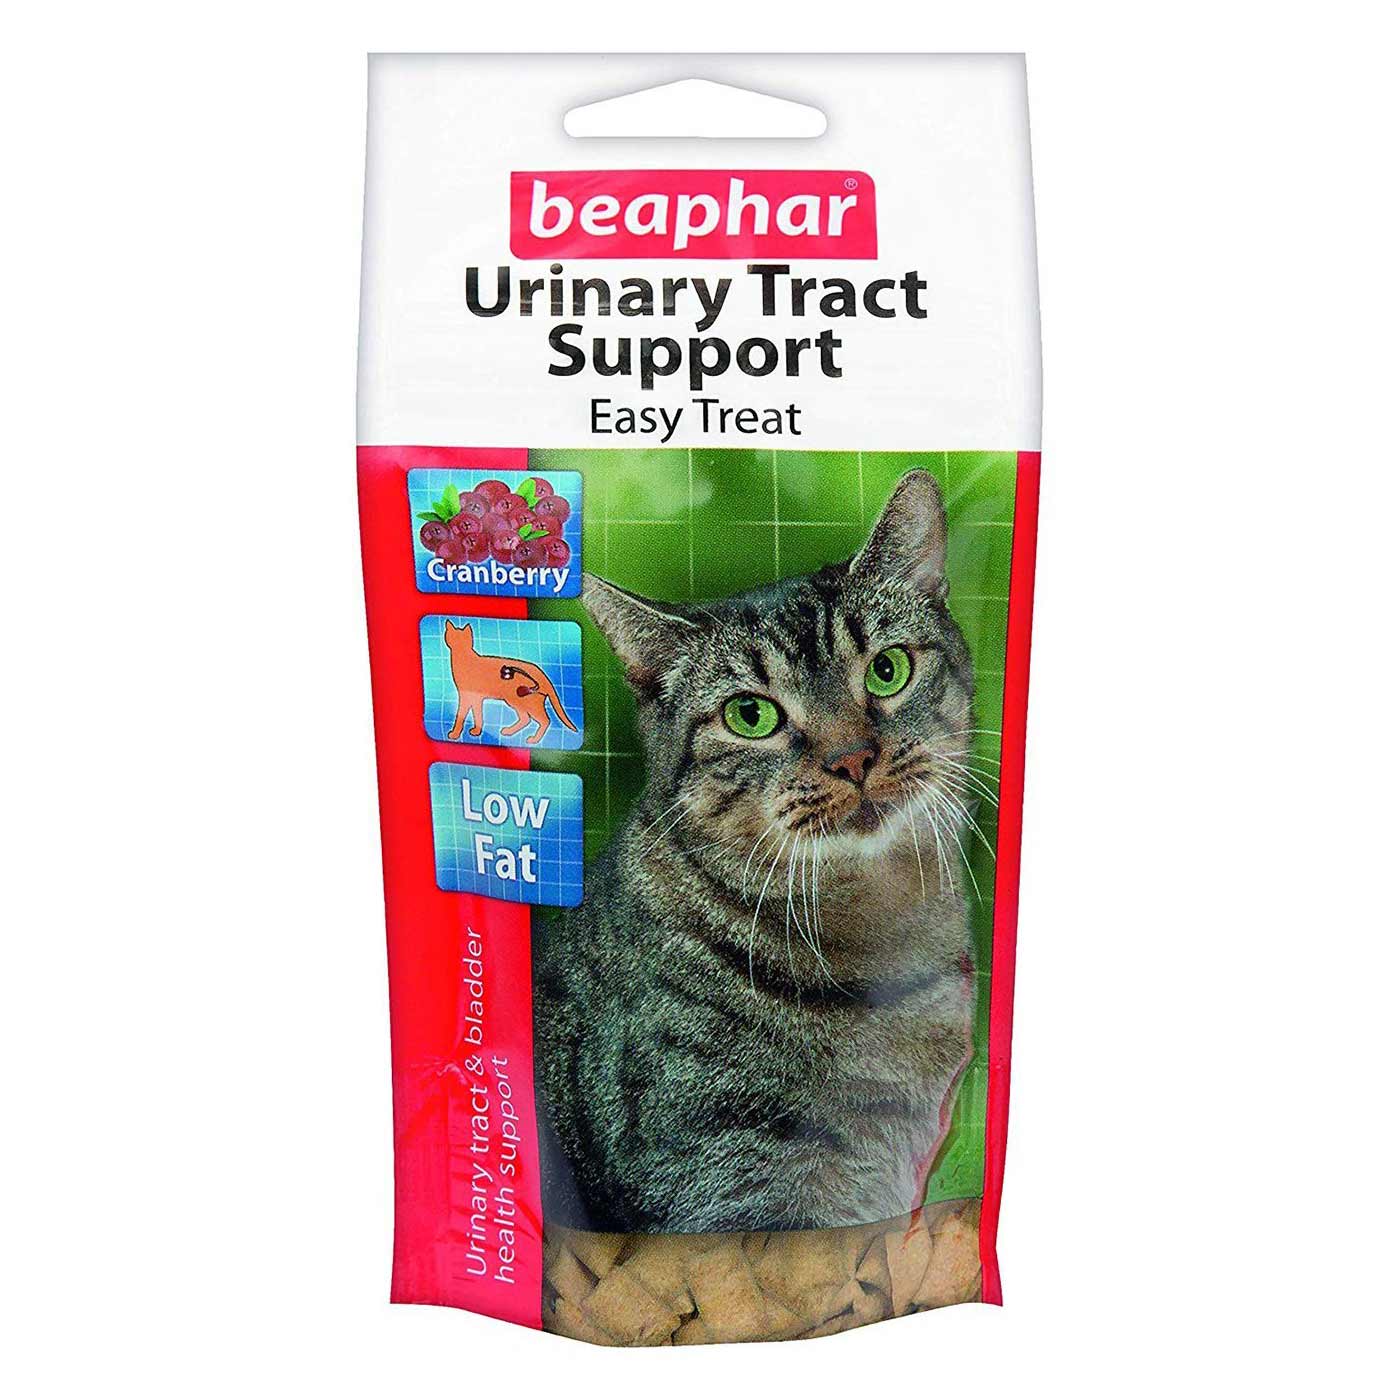 Beaphar Cat Urinary Tract Support Easy Treatment